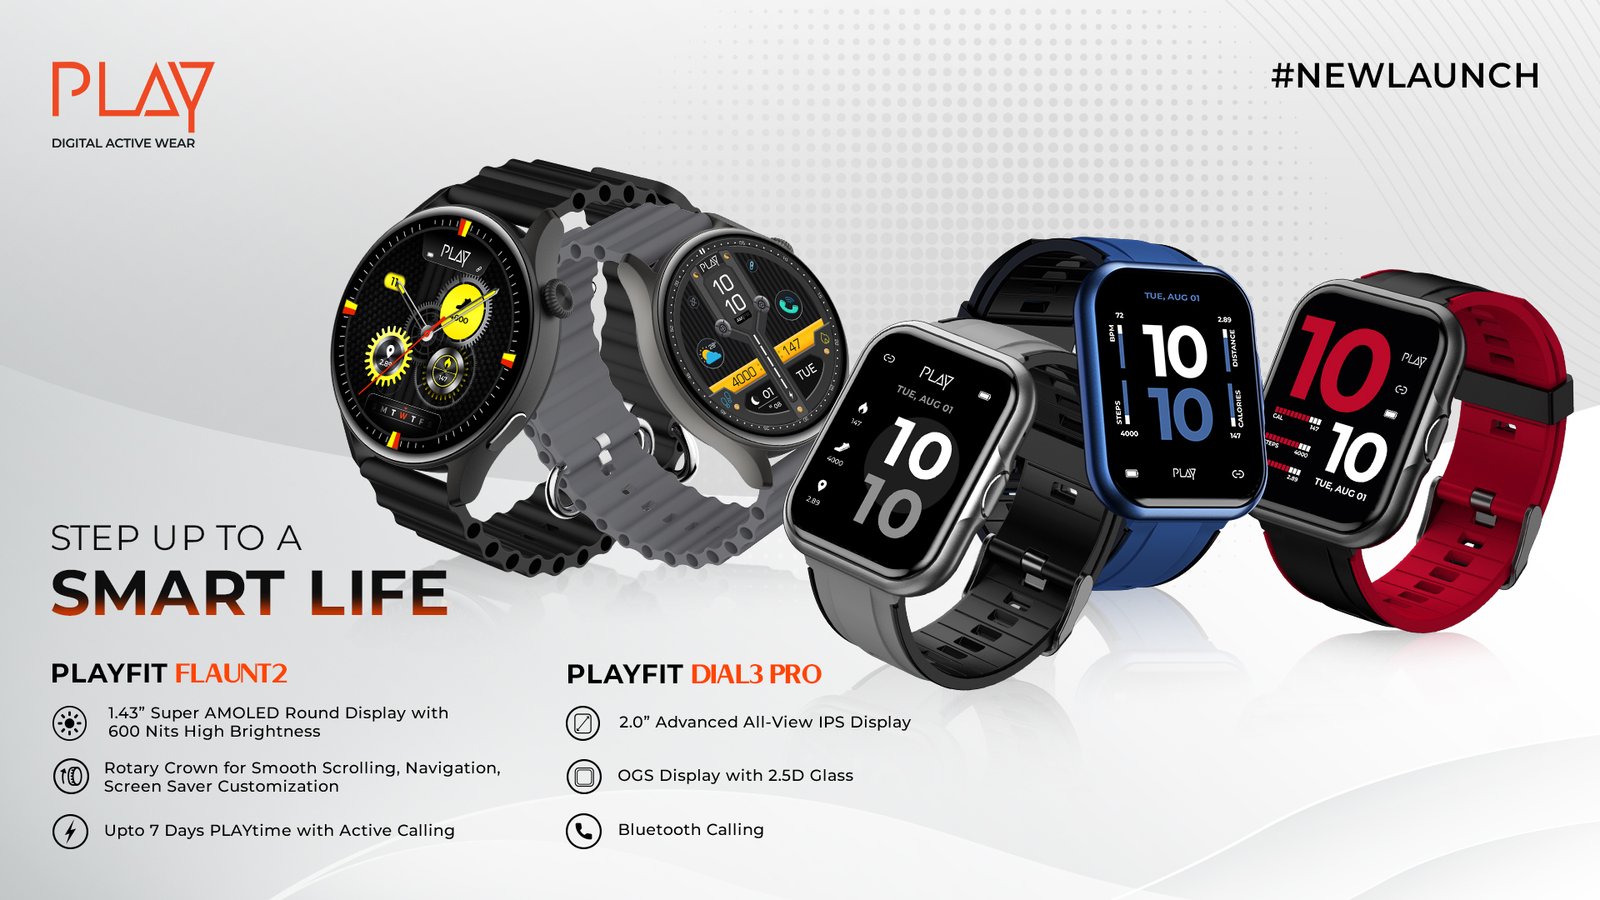 Designed with fashion, style, and innovation in focus, PLAY Unveils Next-Generation smartwatches with Large and AMOLED display, partners with Flipkart for wider reach to the Indian consumer.